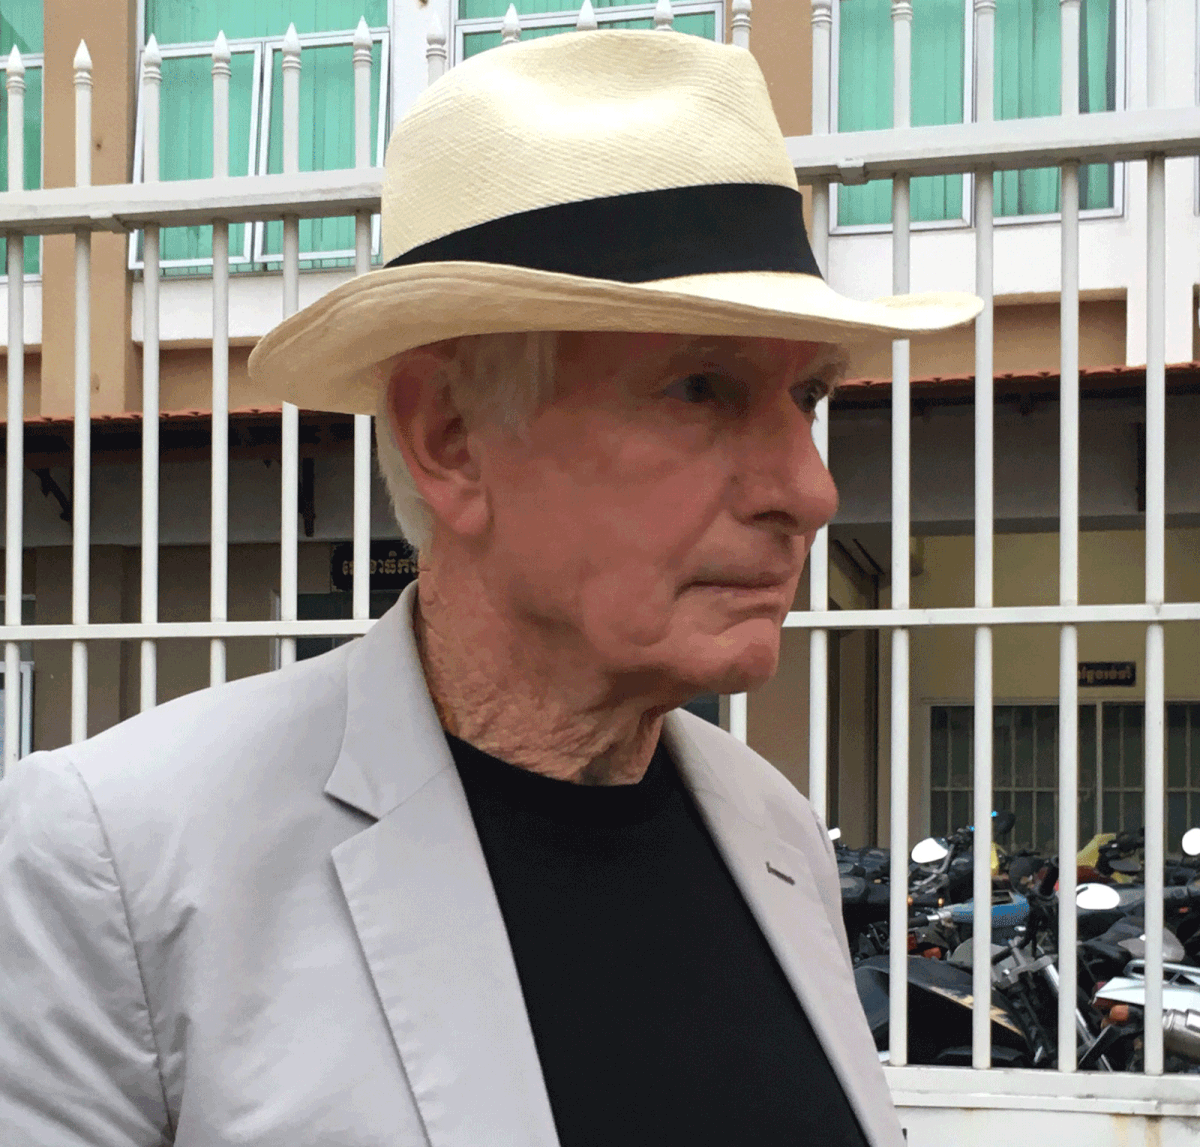 Hollywood director Peter Weir leaves the court in Phnom Penh after testifying in the trial of detained Australian filmmaker James Ricketson on 16 August. Photo: AFP